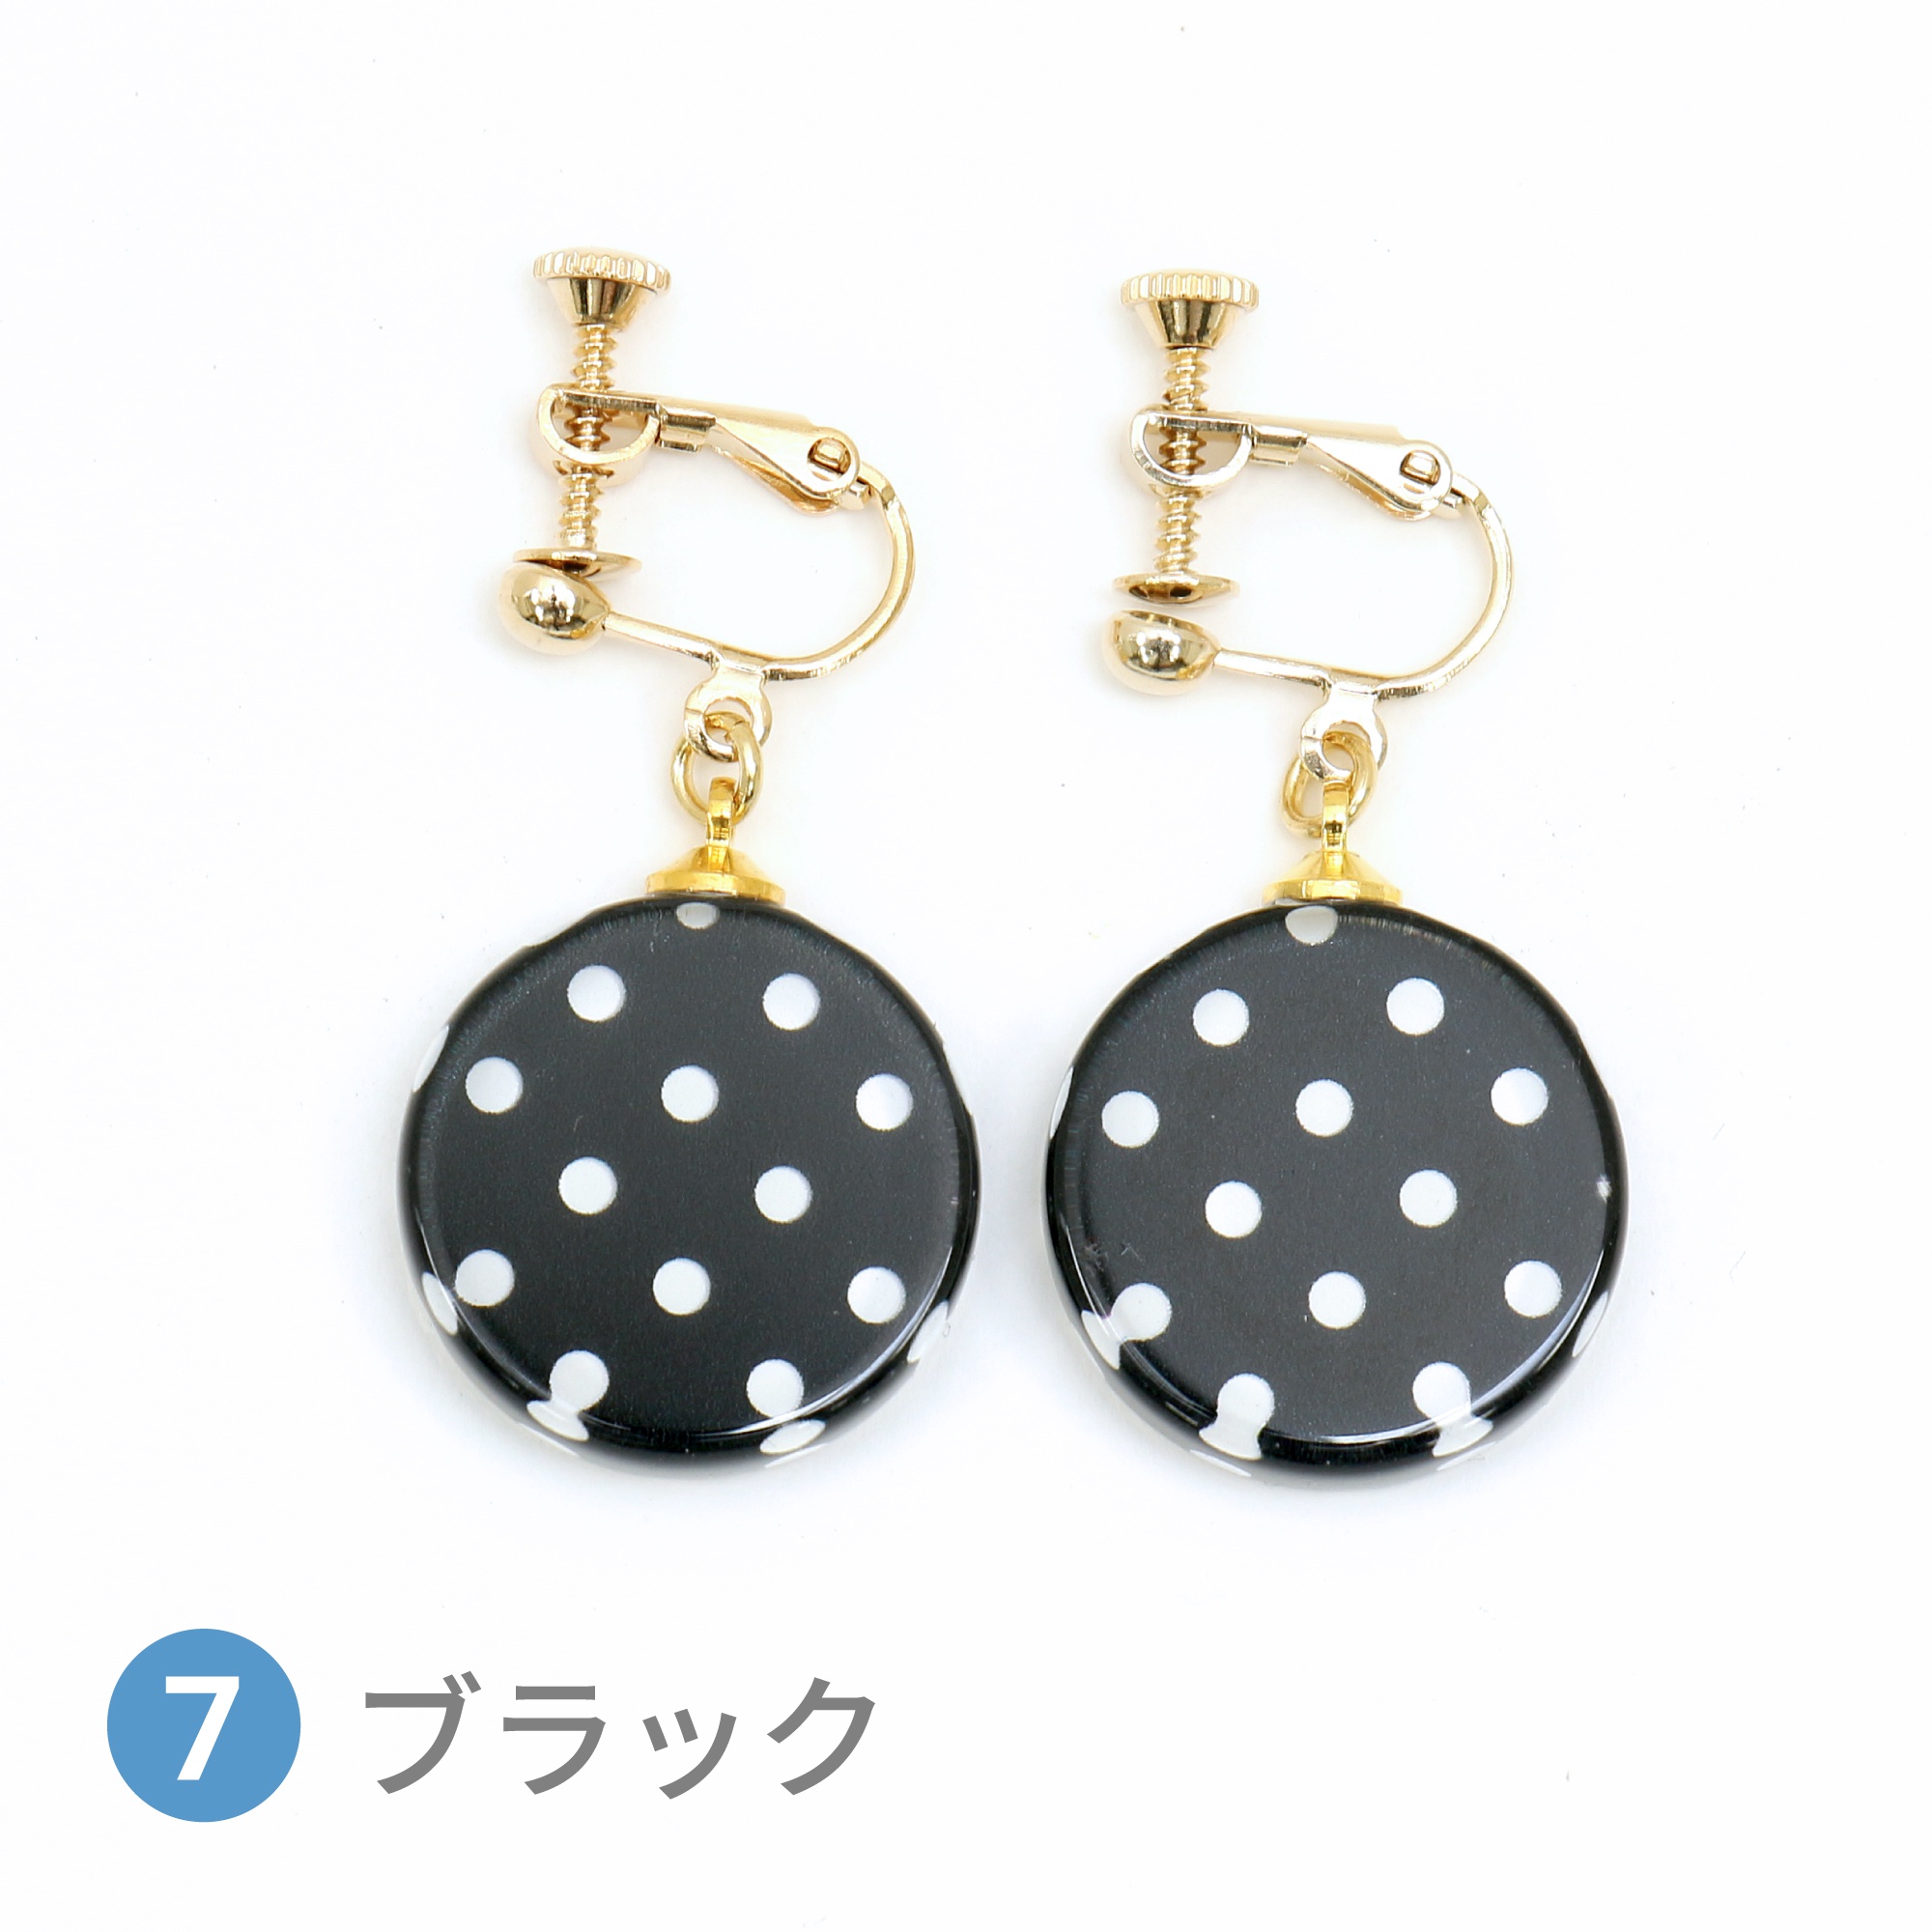 Glass accessories Earring DOT black round shape